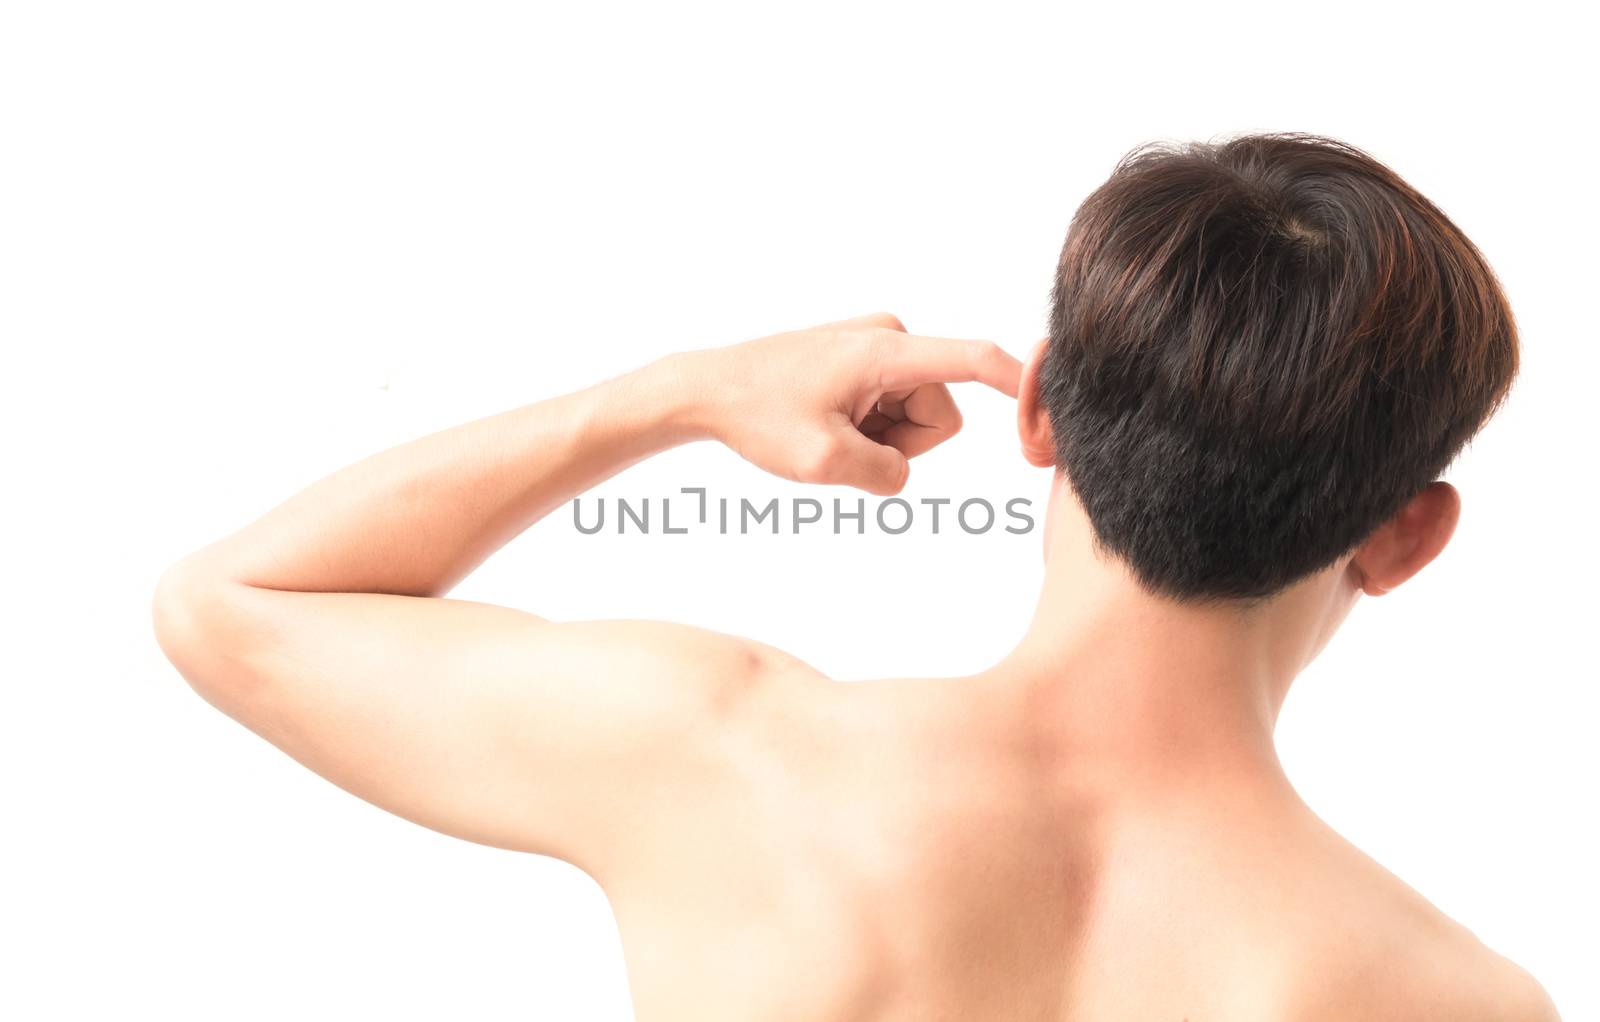 Man scratching an itch ear with finger on white background, health care and medical concept